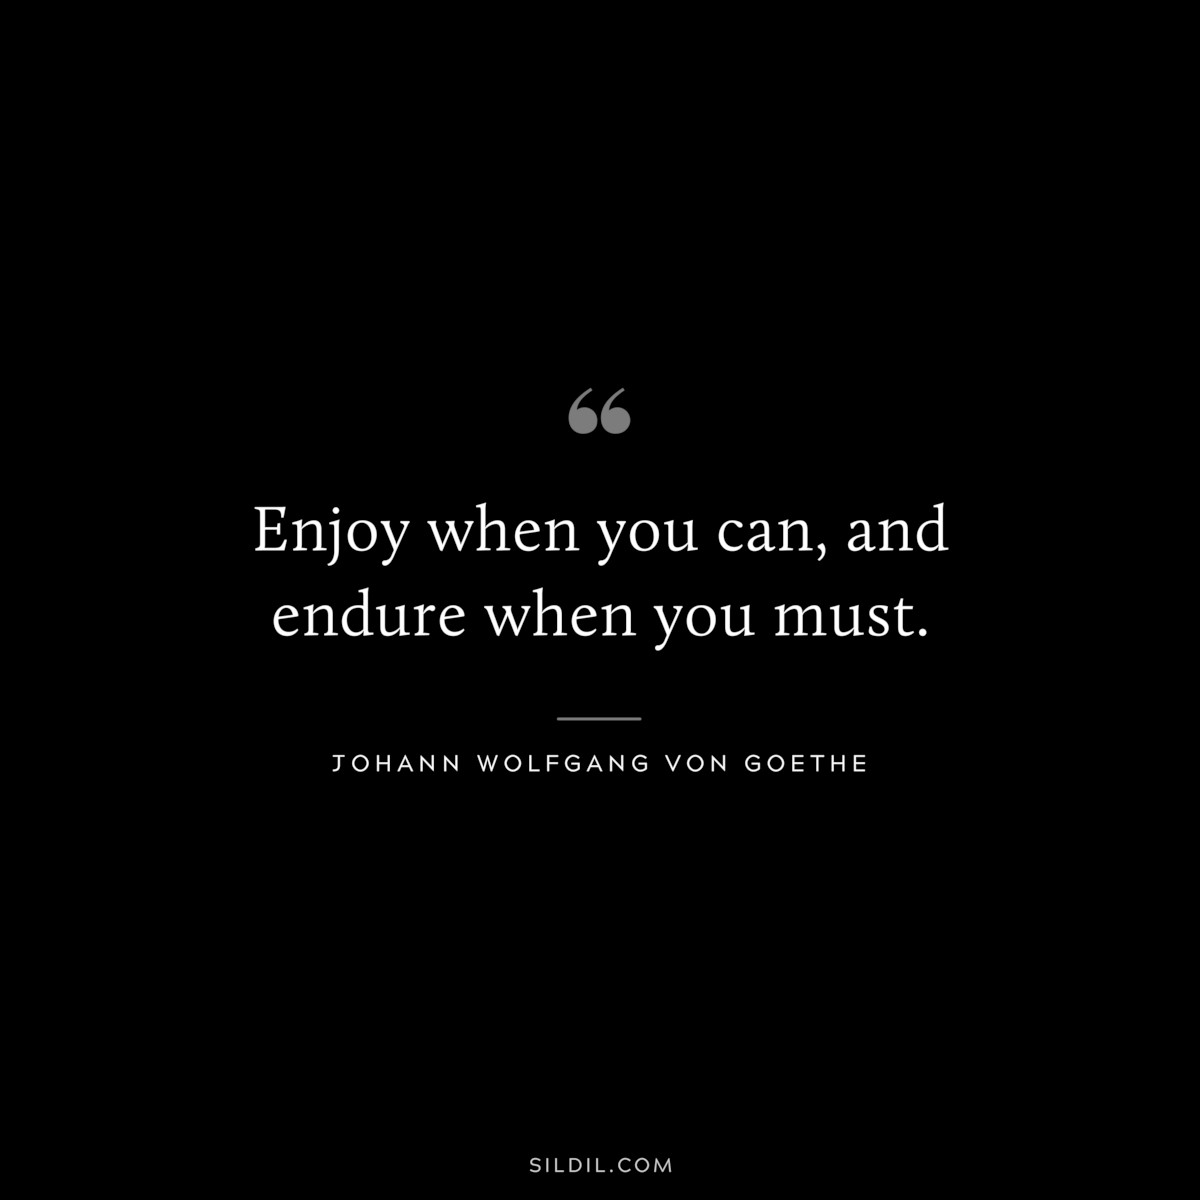 Enjoy when you can, and endure when you must.― Johann Wolfgang von Goethe